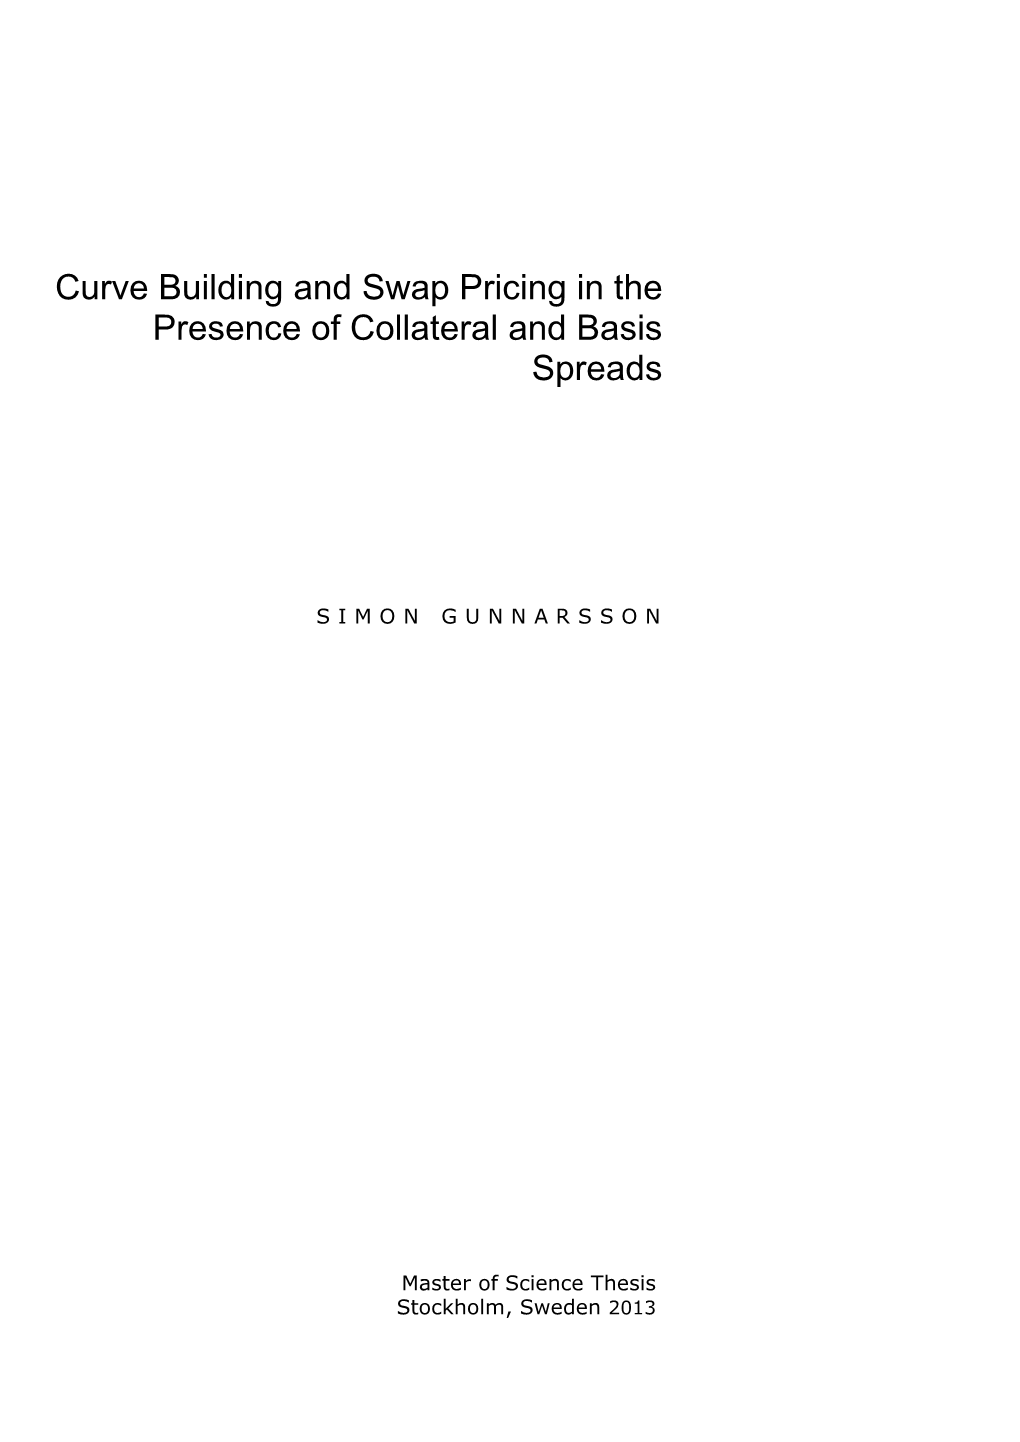 Curve Building and Swap Pricing in the Presence of Collateral and Basis Spreads